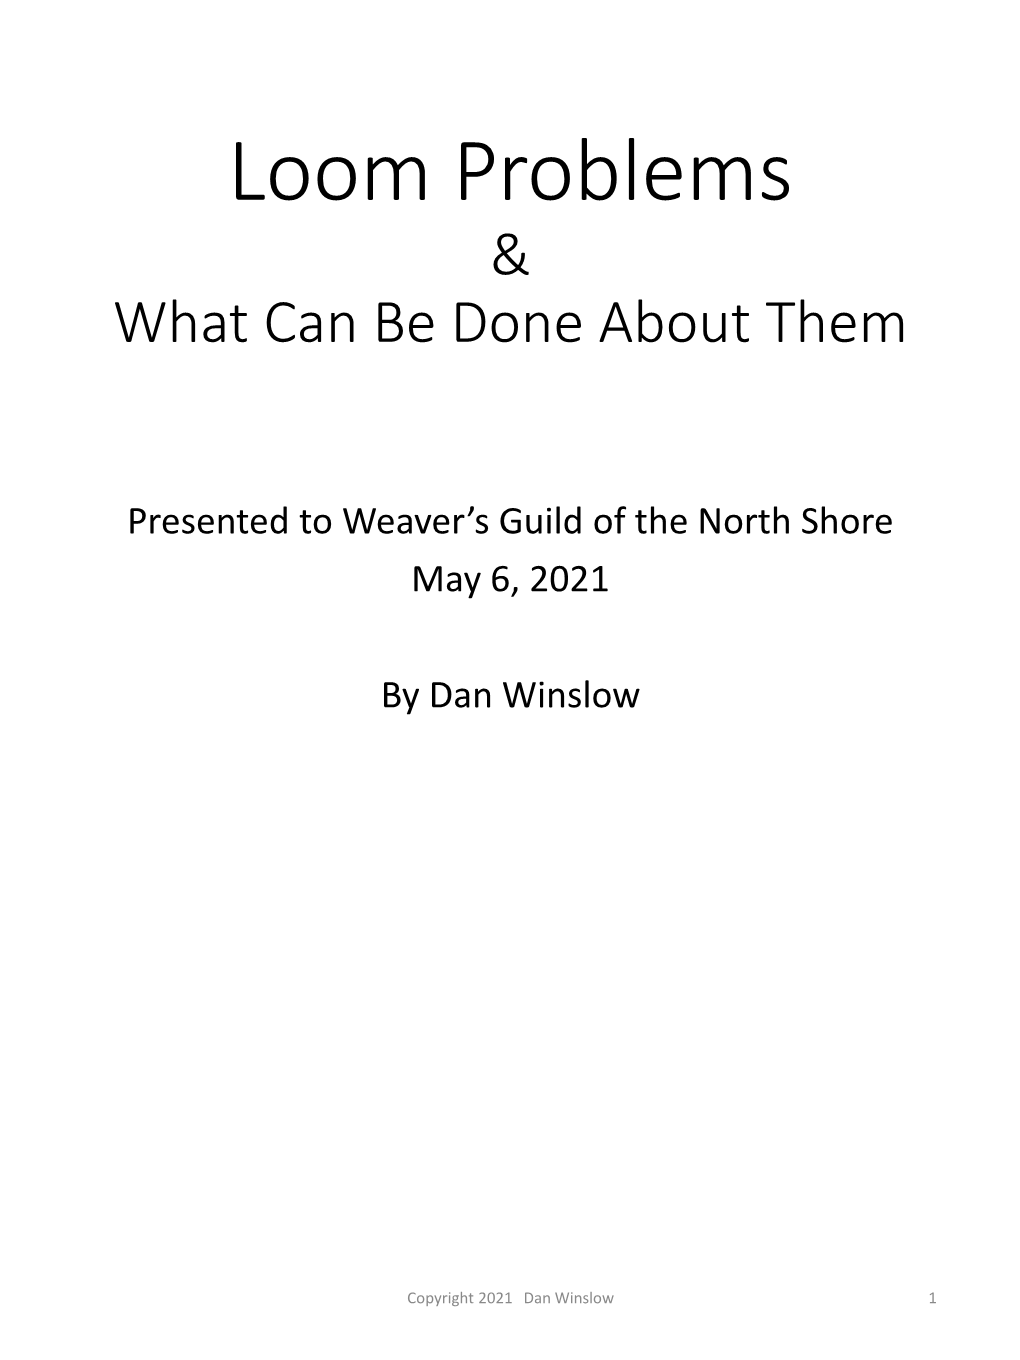 Loom Problems and What Can Be Done About Them